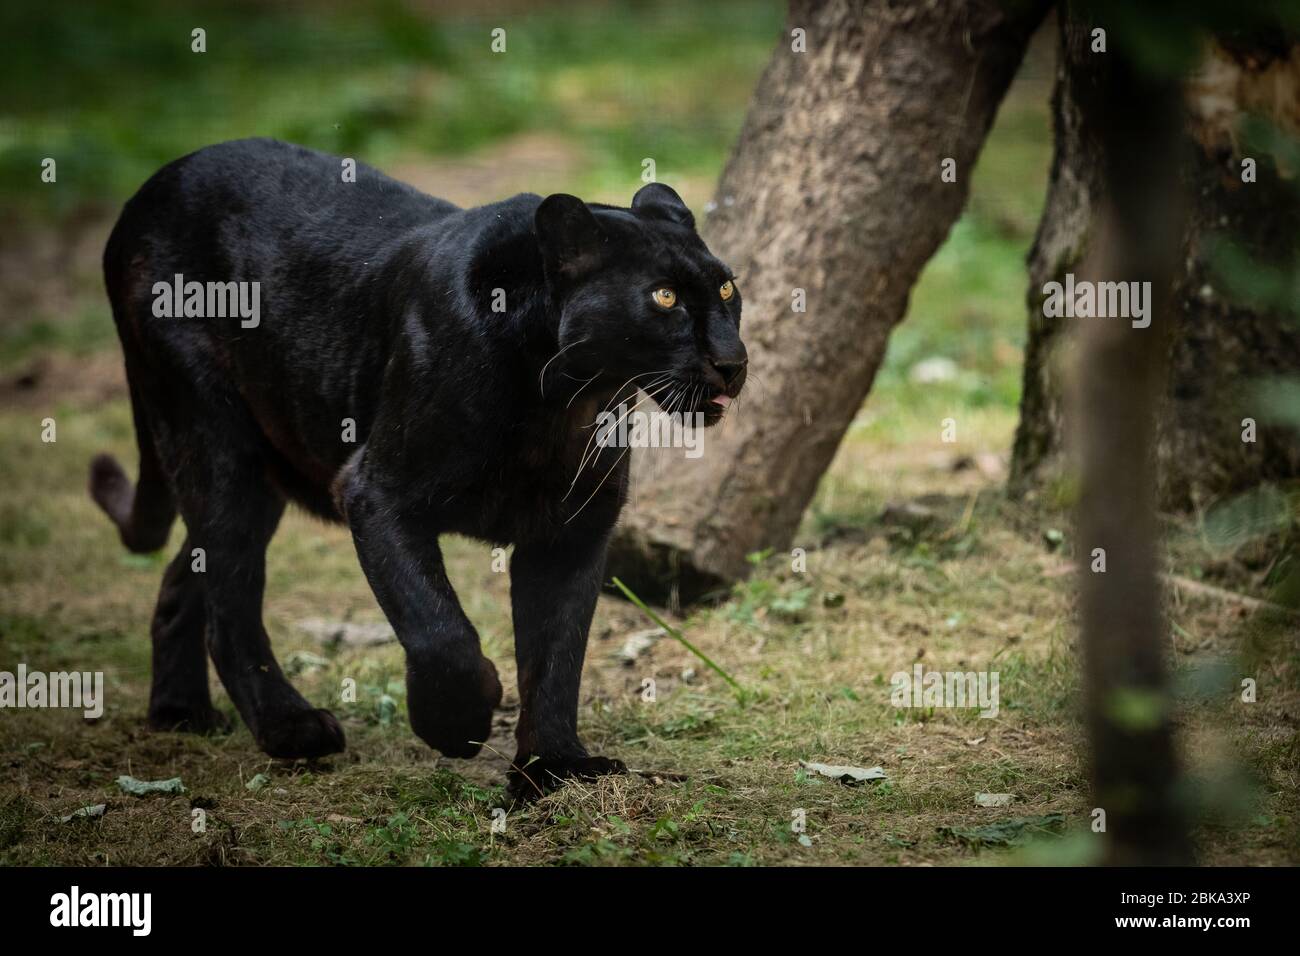 Black panther walking in the jungle Stock Photo - Alamy